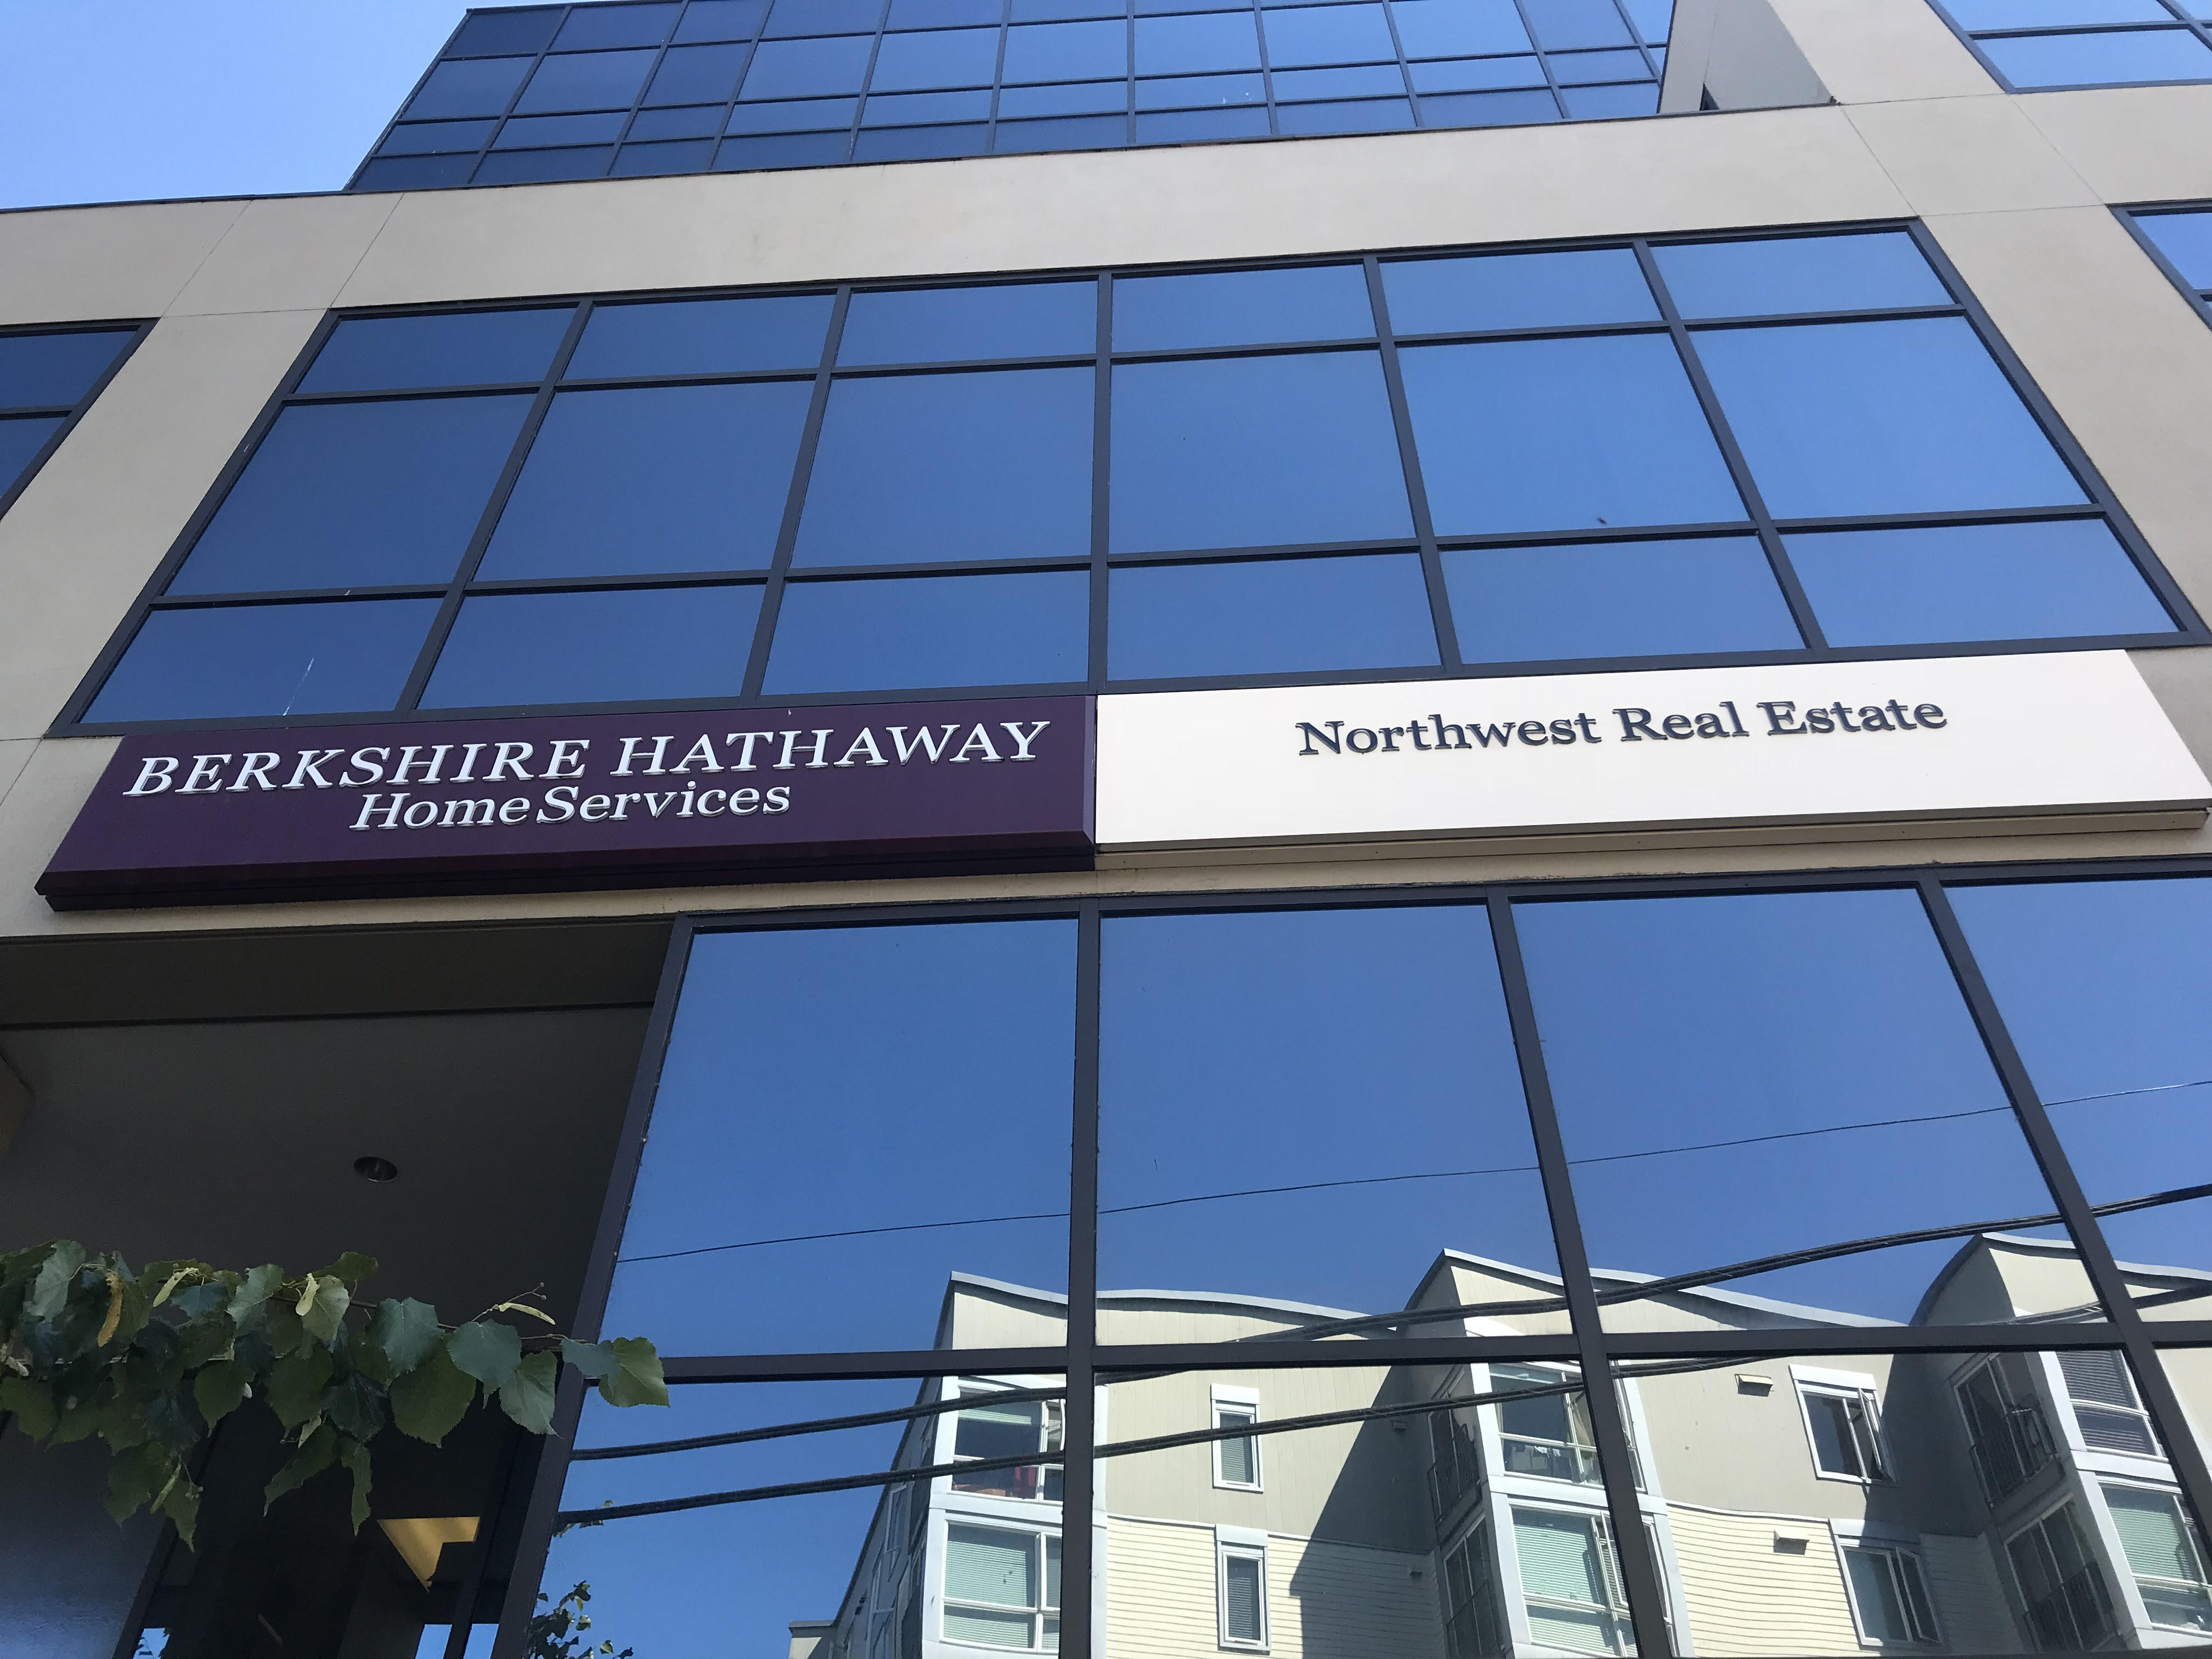 Berkshire Hathaway HomeServices North West Real Estate - West Seattle | 4700 42nd Ave SW #600, Seattle, WA, 98116 | +1 (206) 932-4500